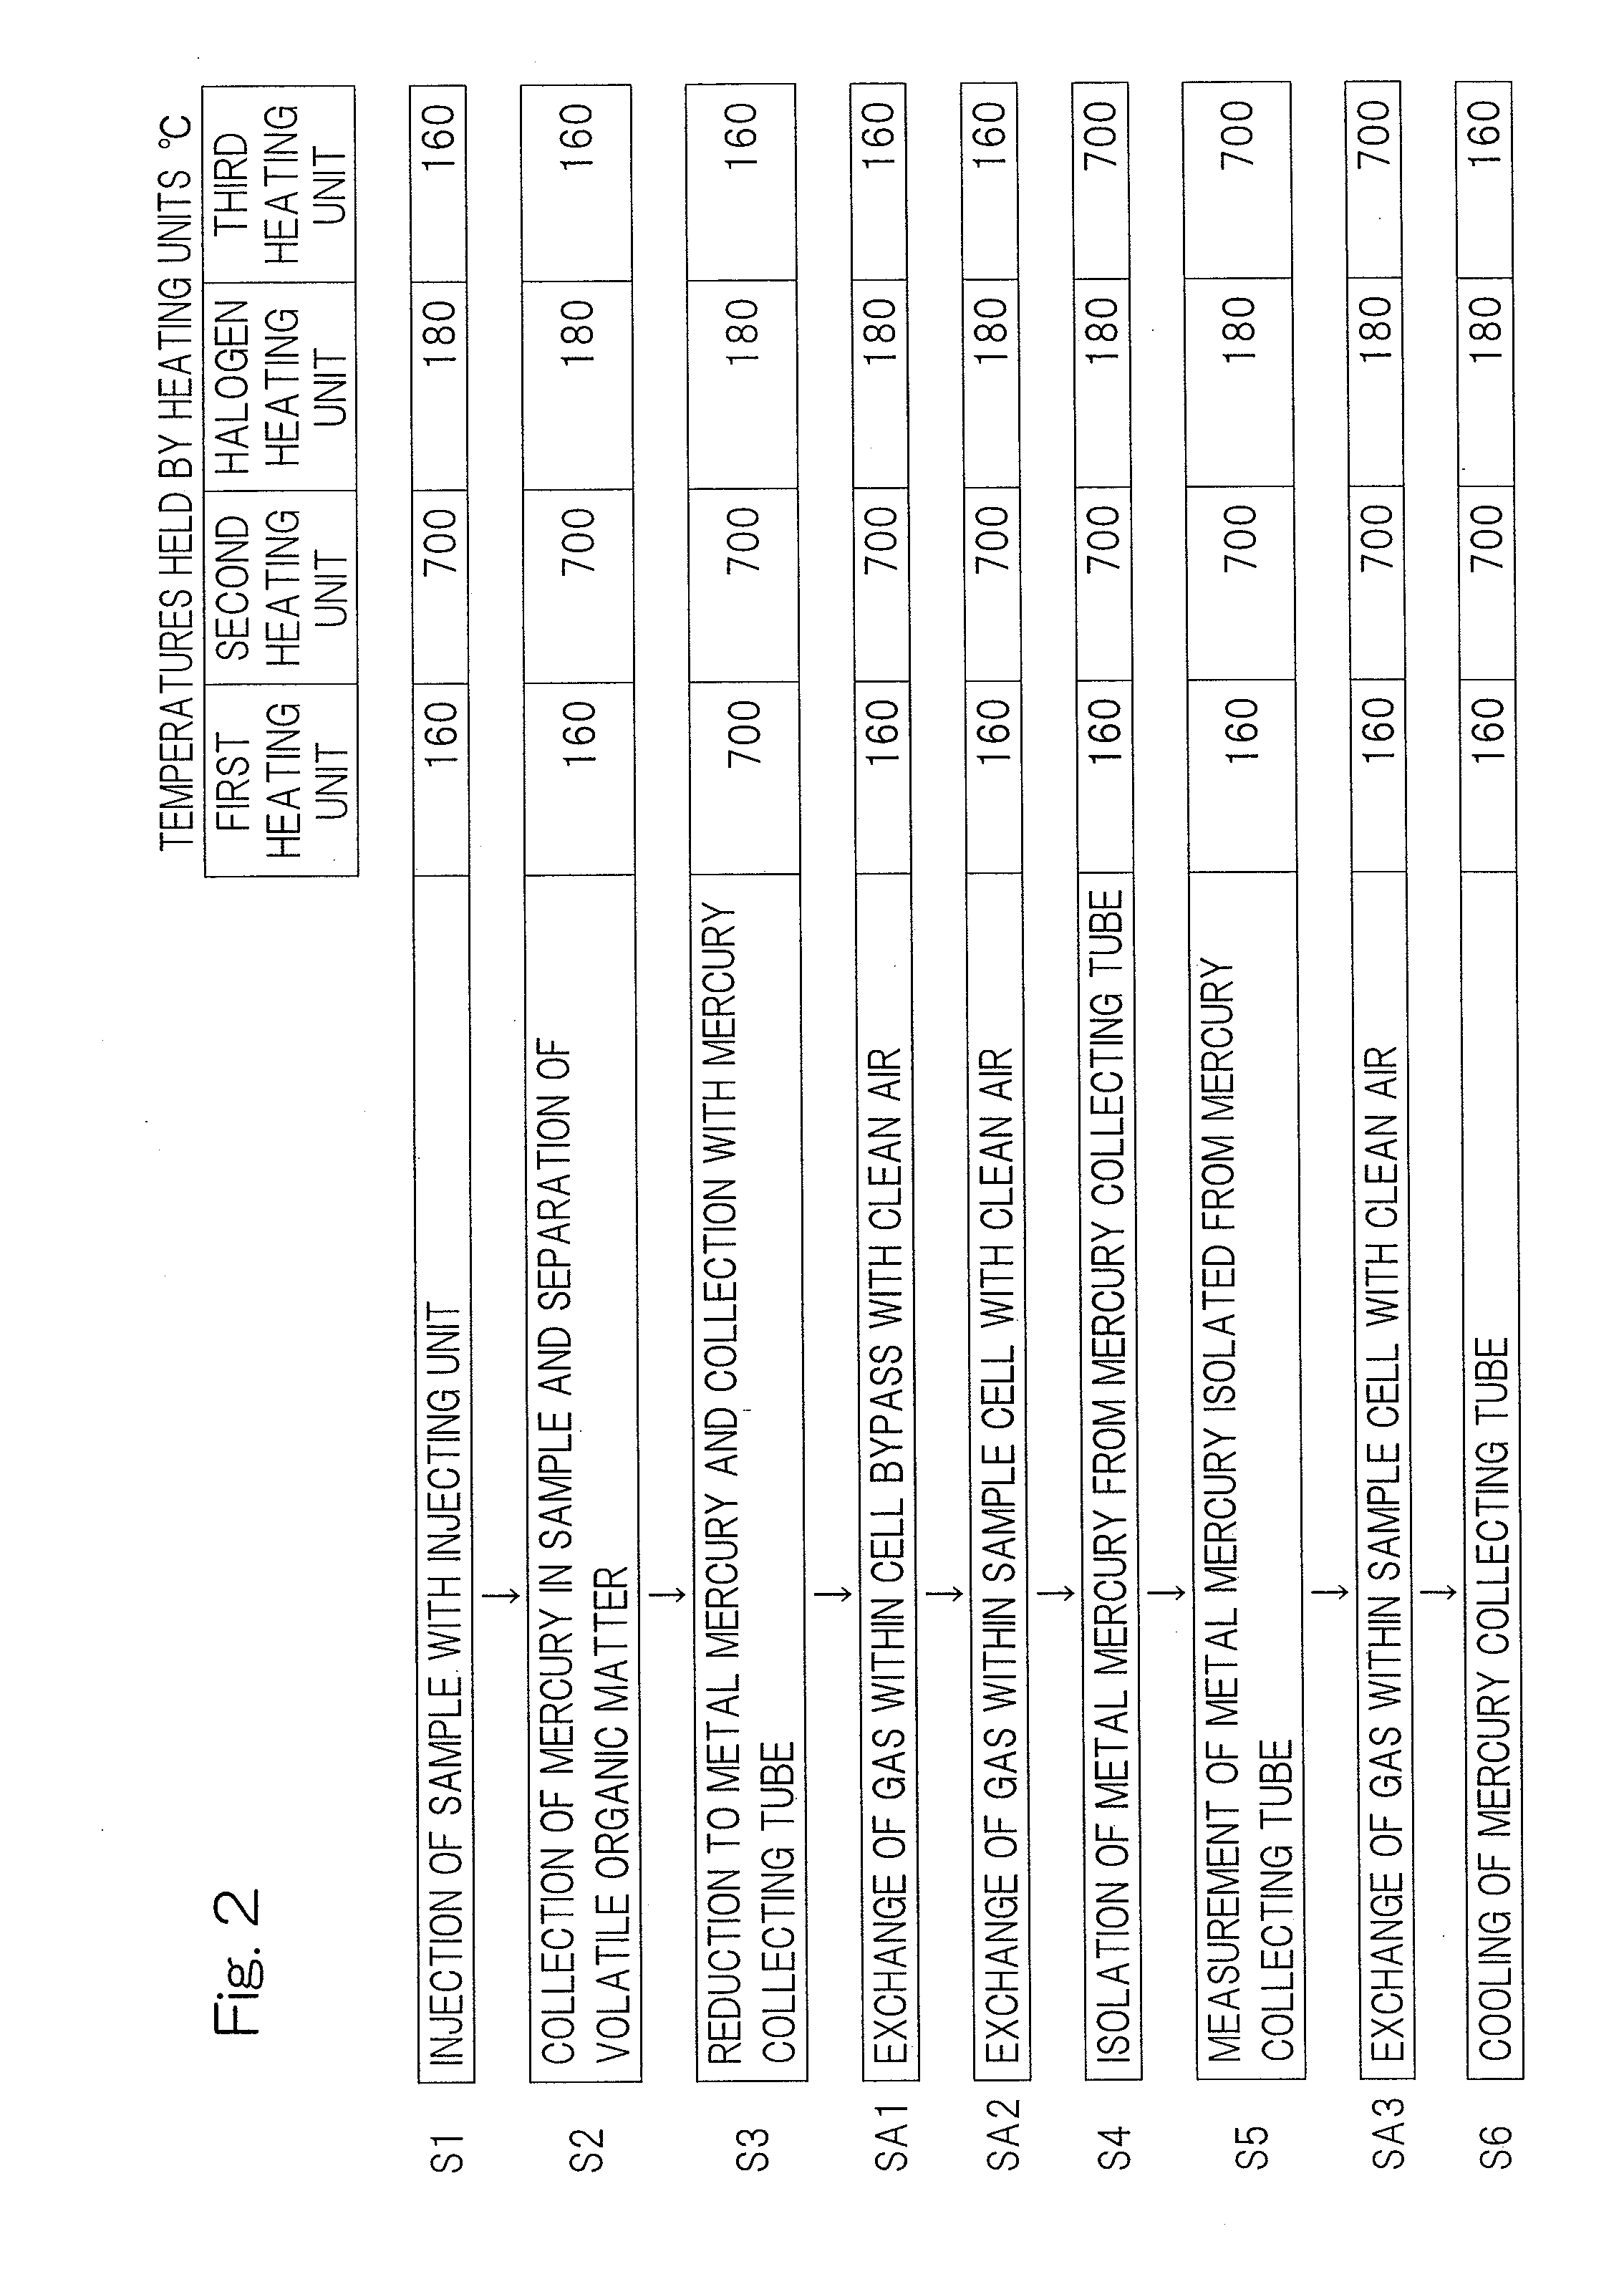 Mercury measuring apparatus for measuring mercury contained in sample composed mainly of hydrocarbon